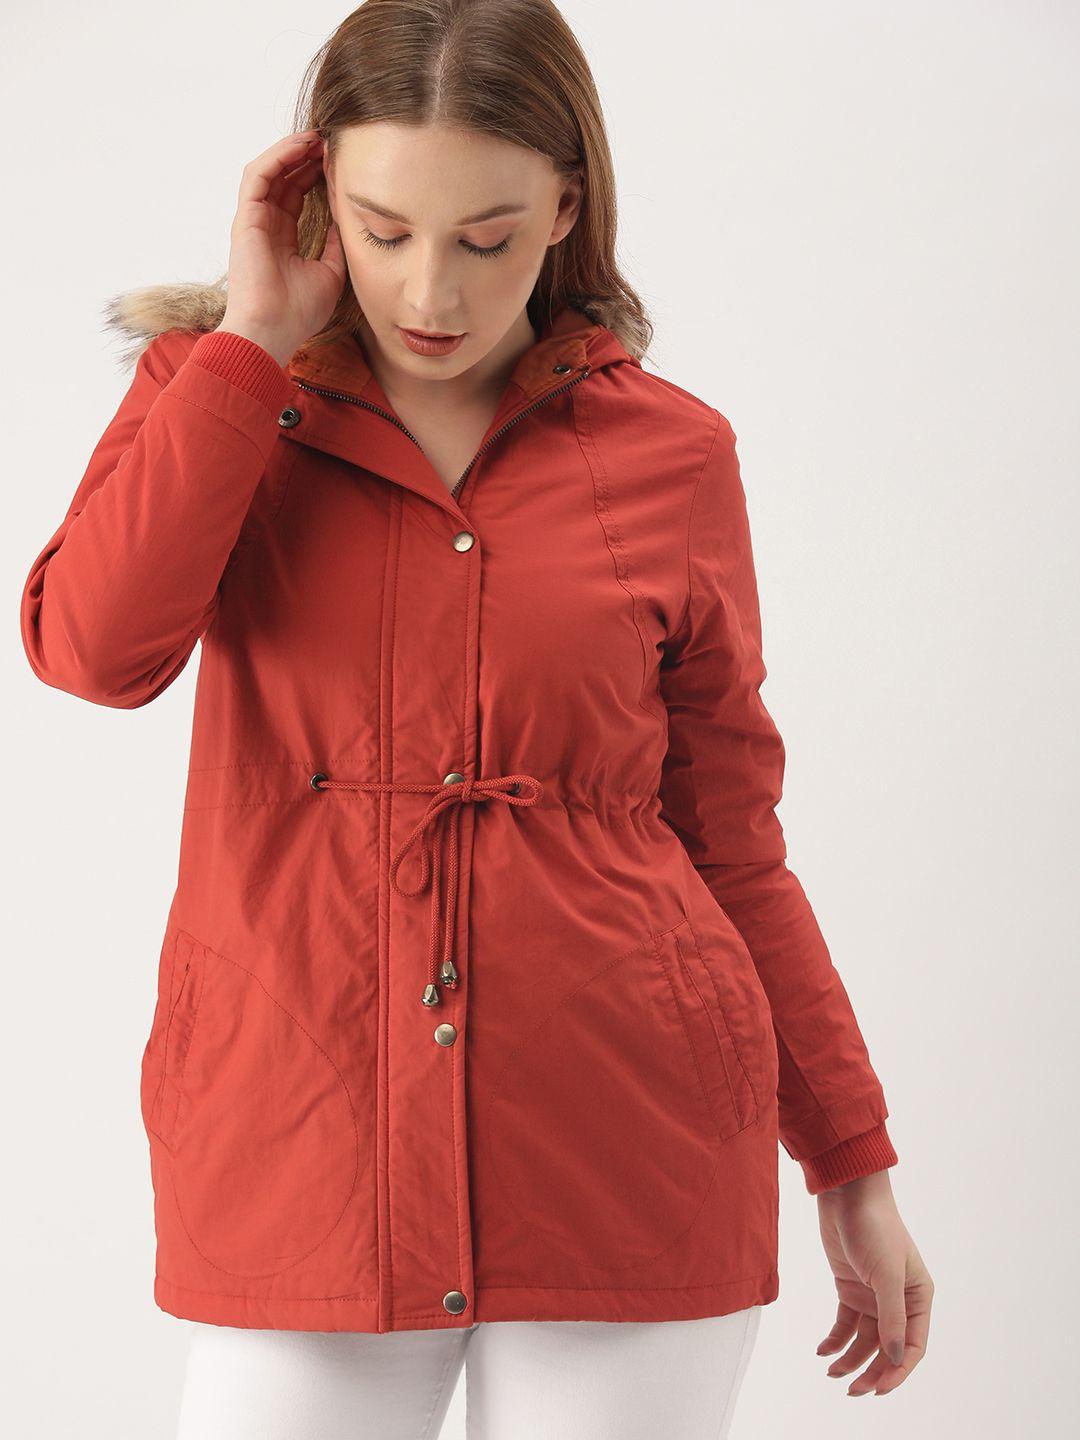 dressberry-women-rust-red-solid-hooded-parka-jacket